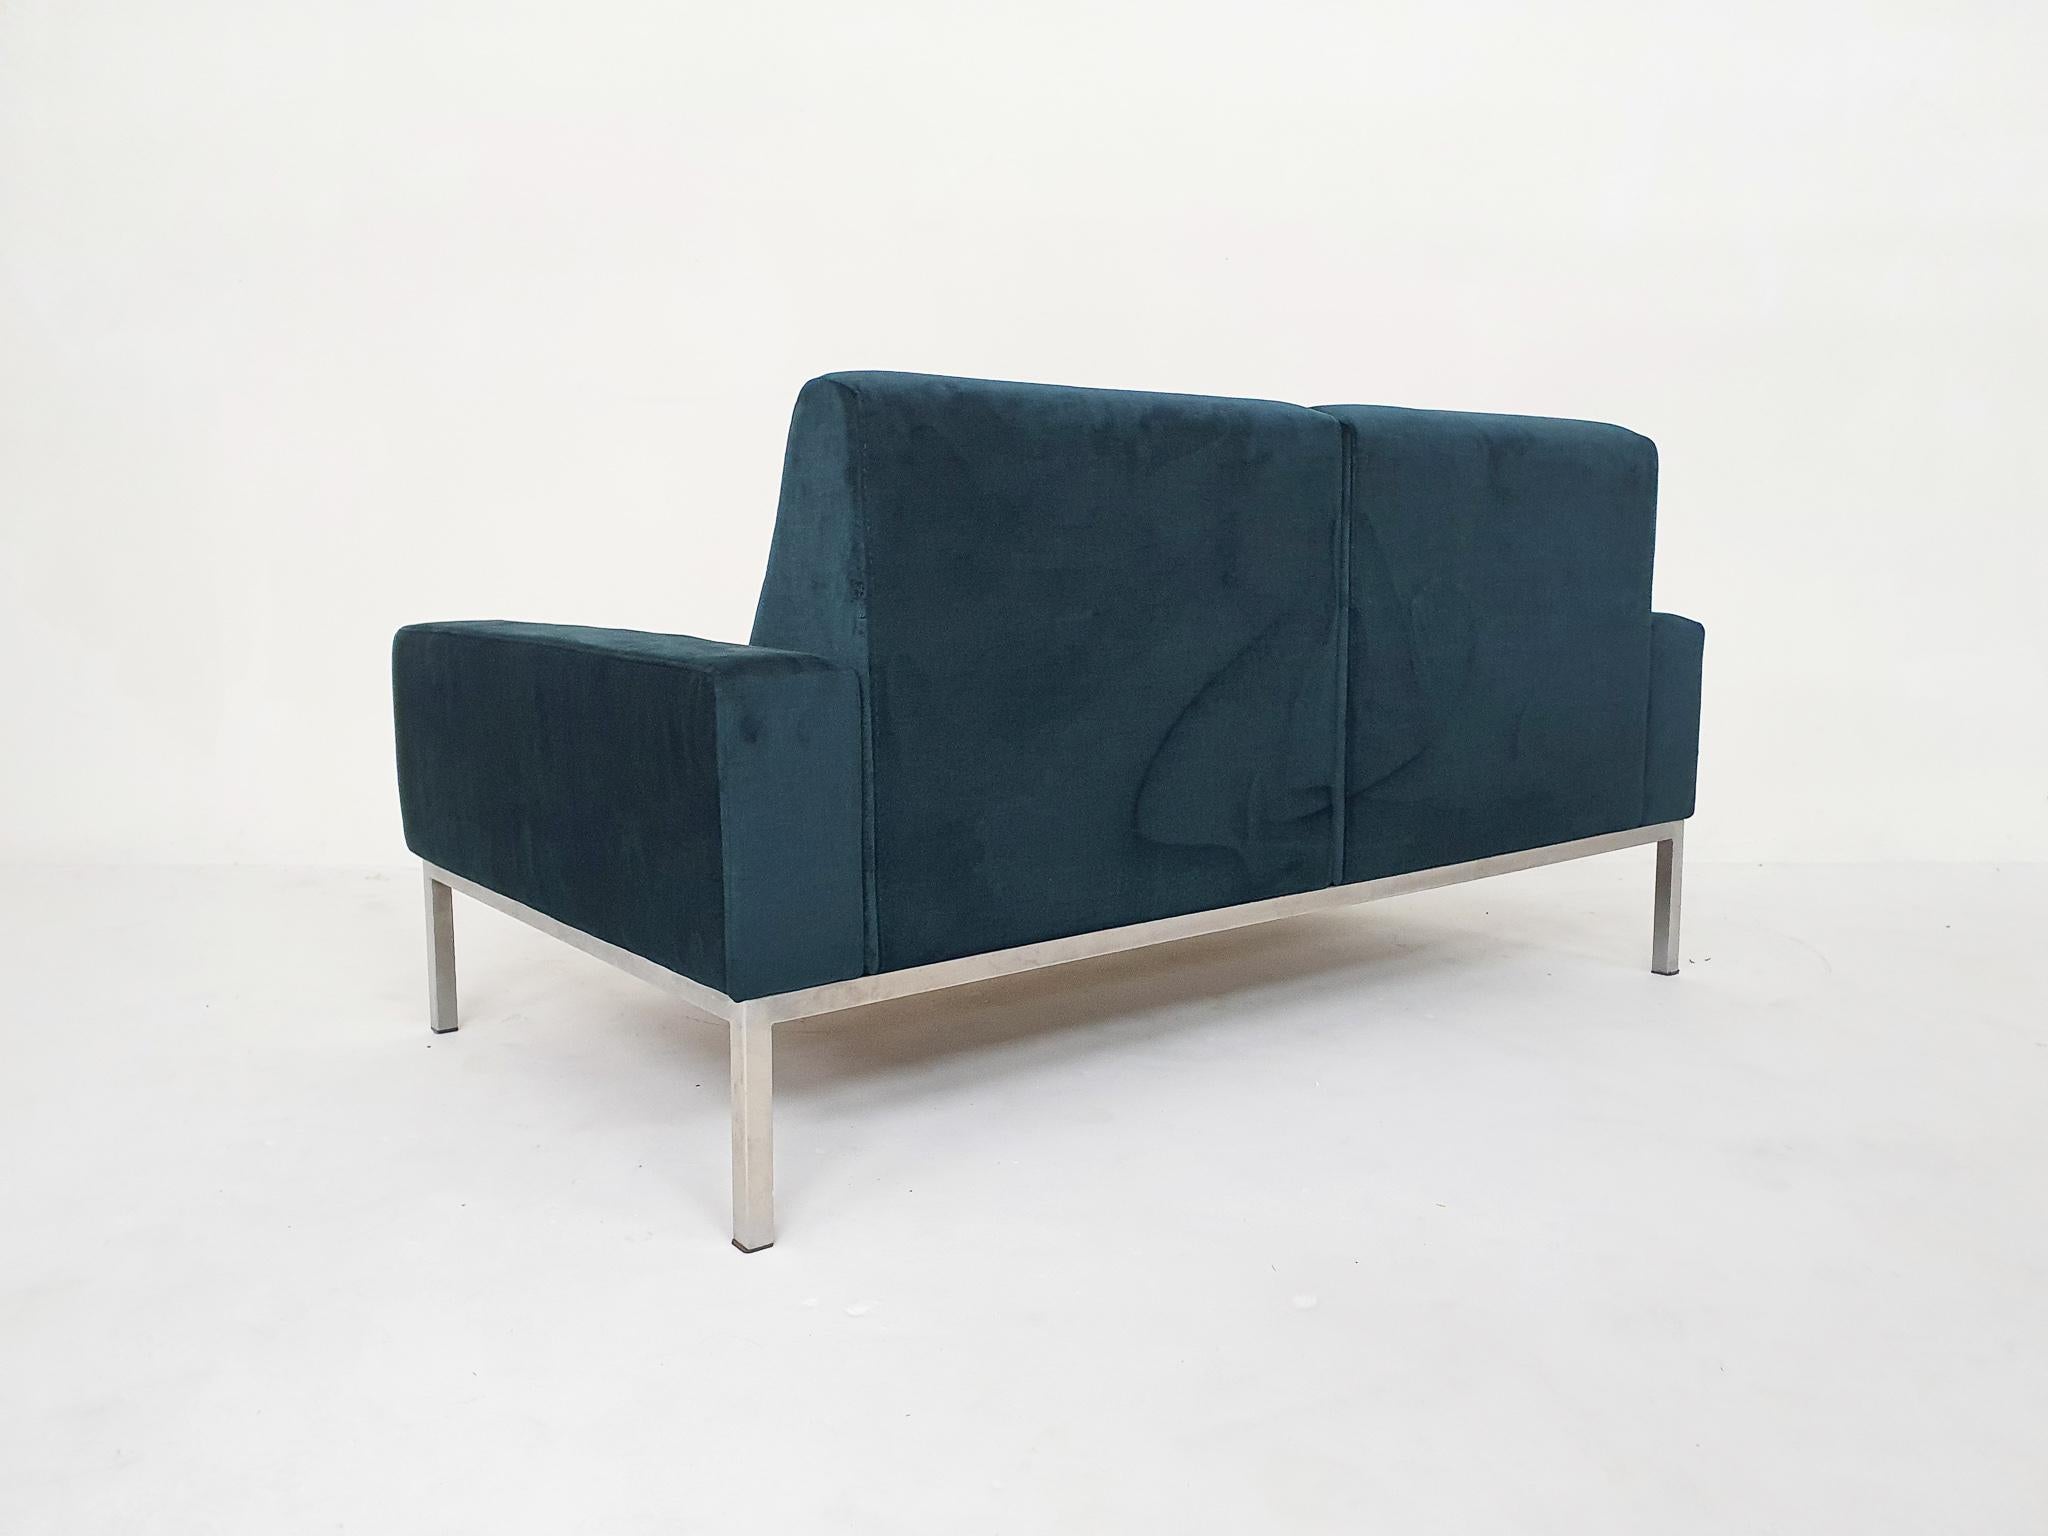 Metal Two-Seater Sofa Attrb to Gelderland, The Netherlands 1950's For Sale